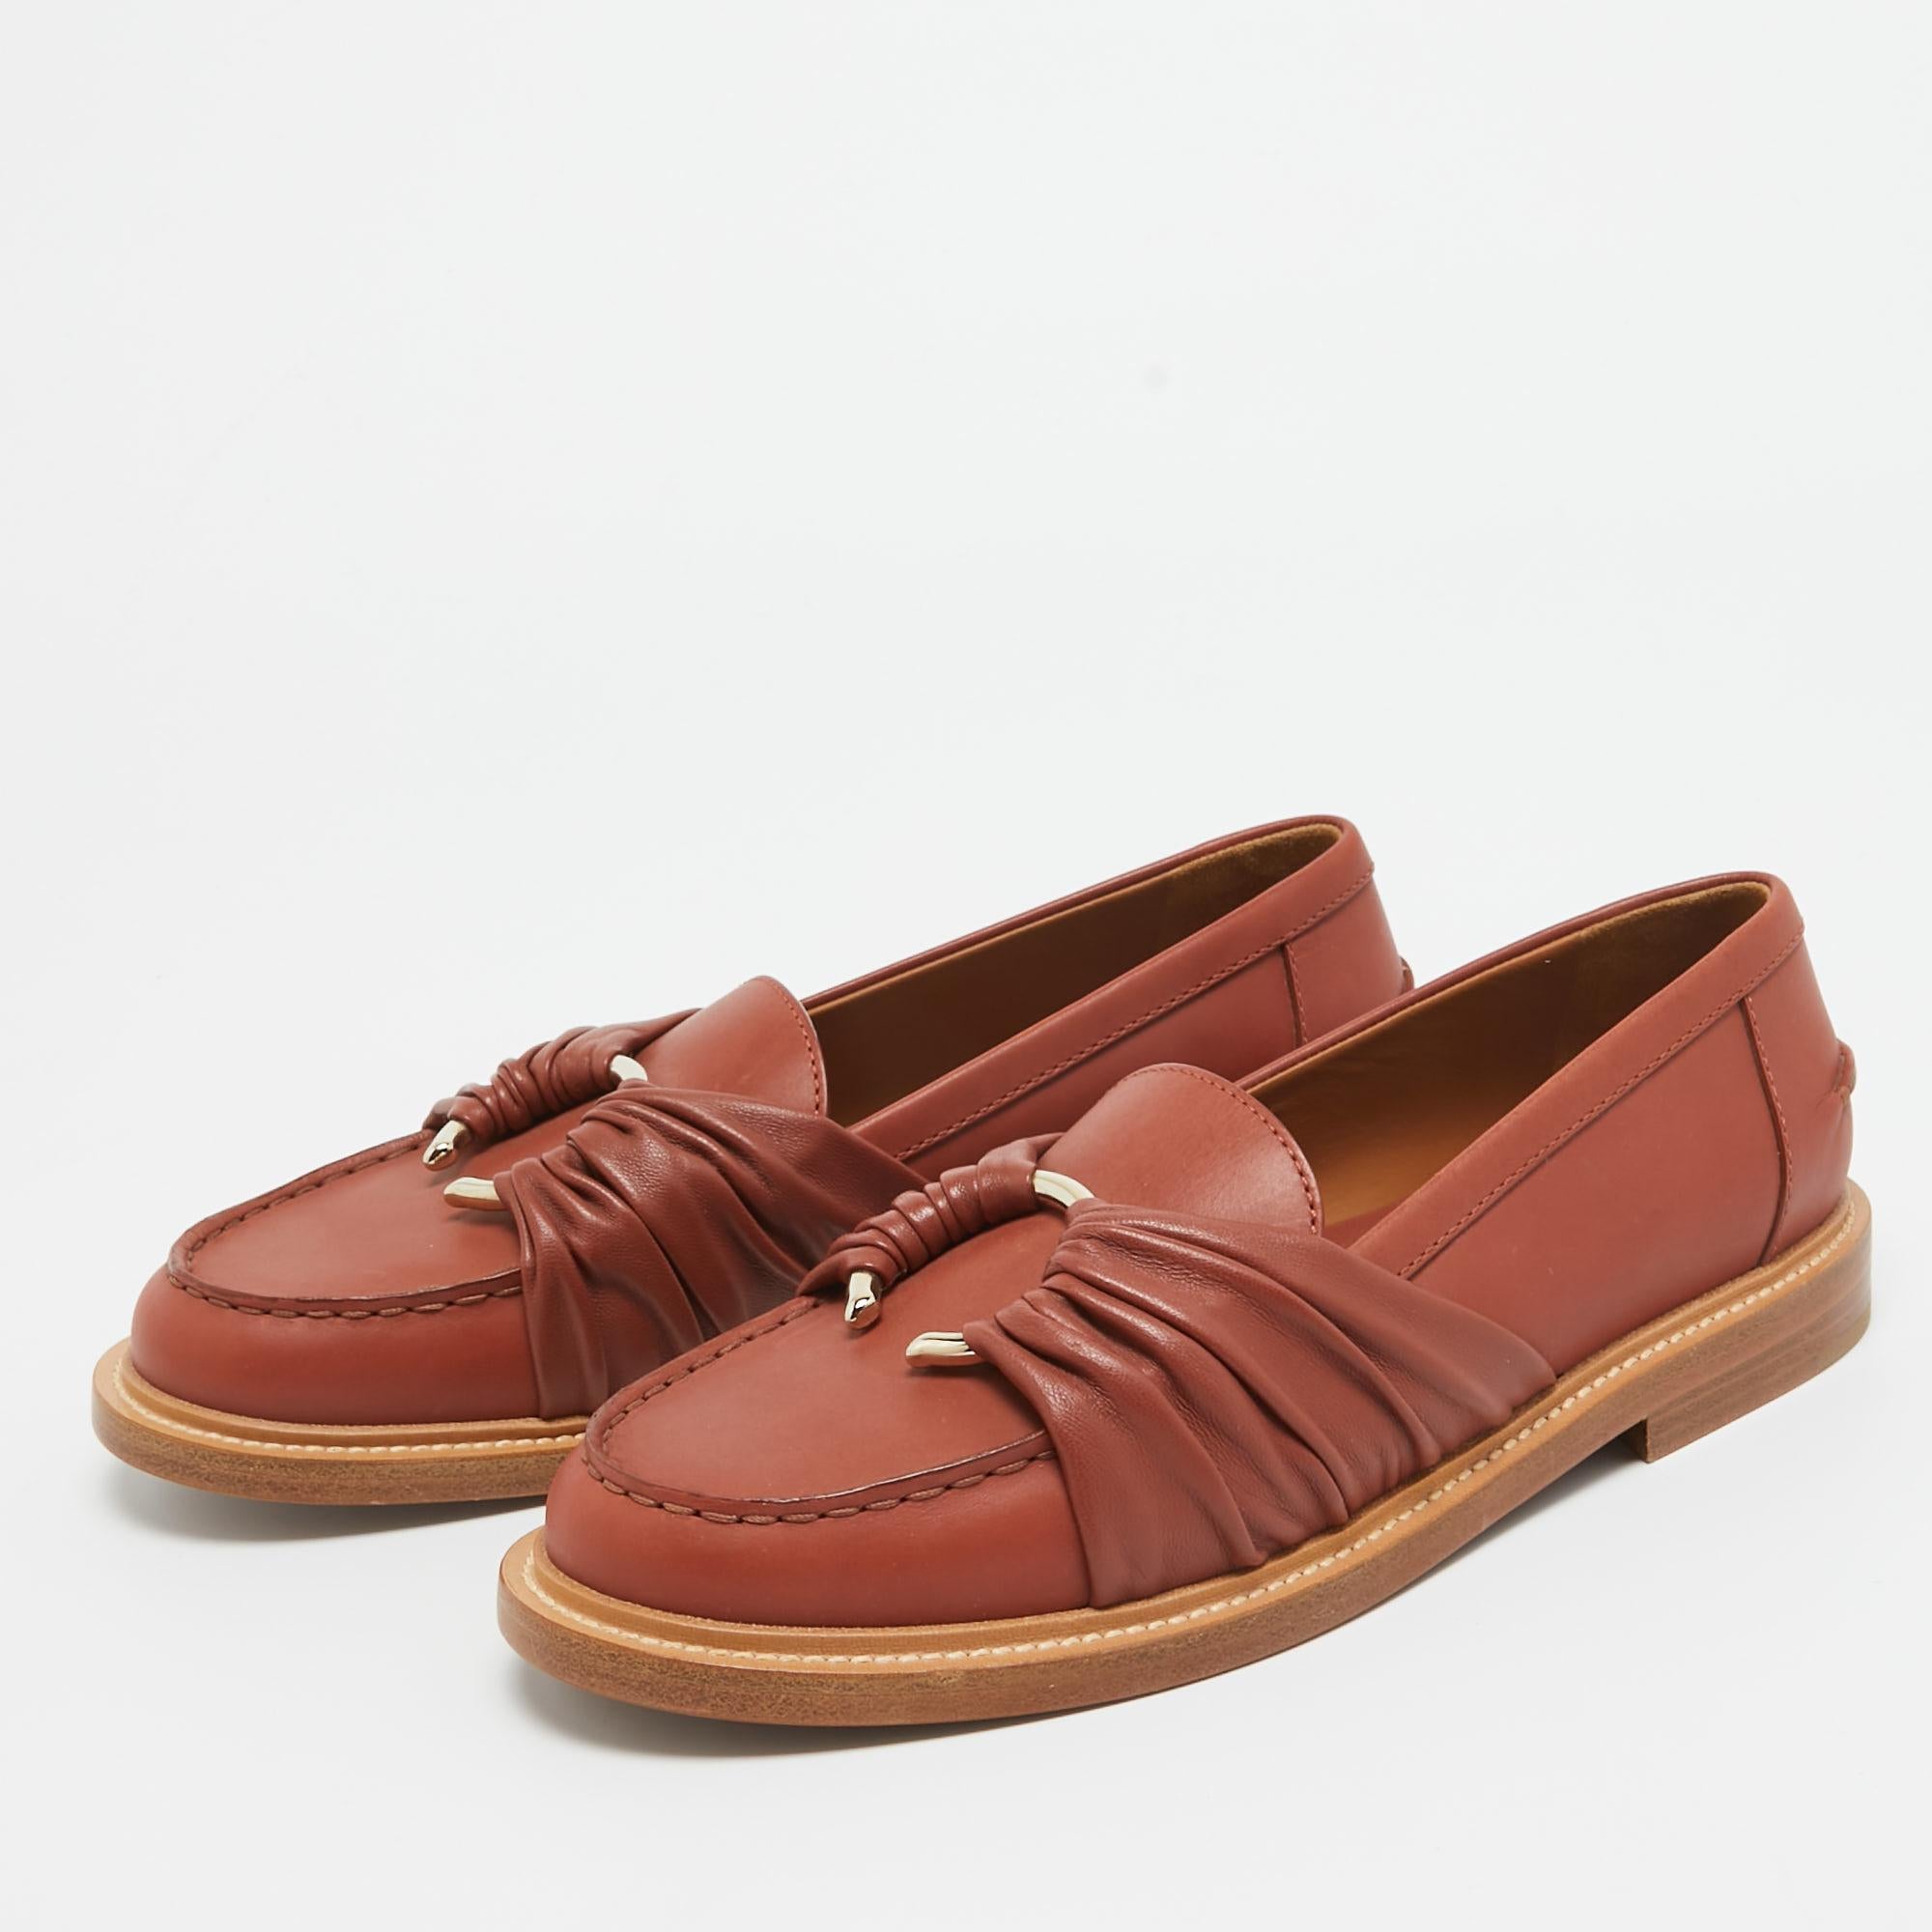 Chloe Brown Leather C Logo Loafers Size 38 For Sale 2